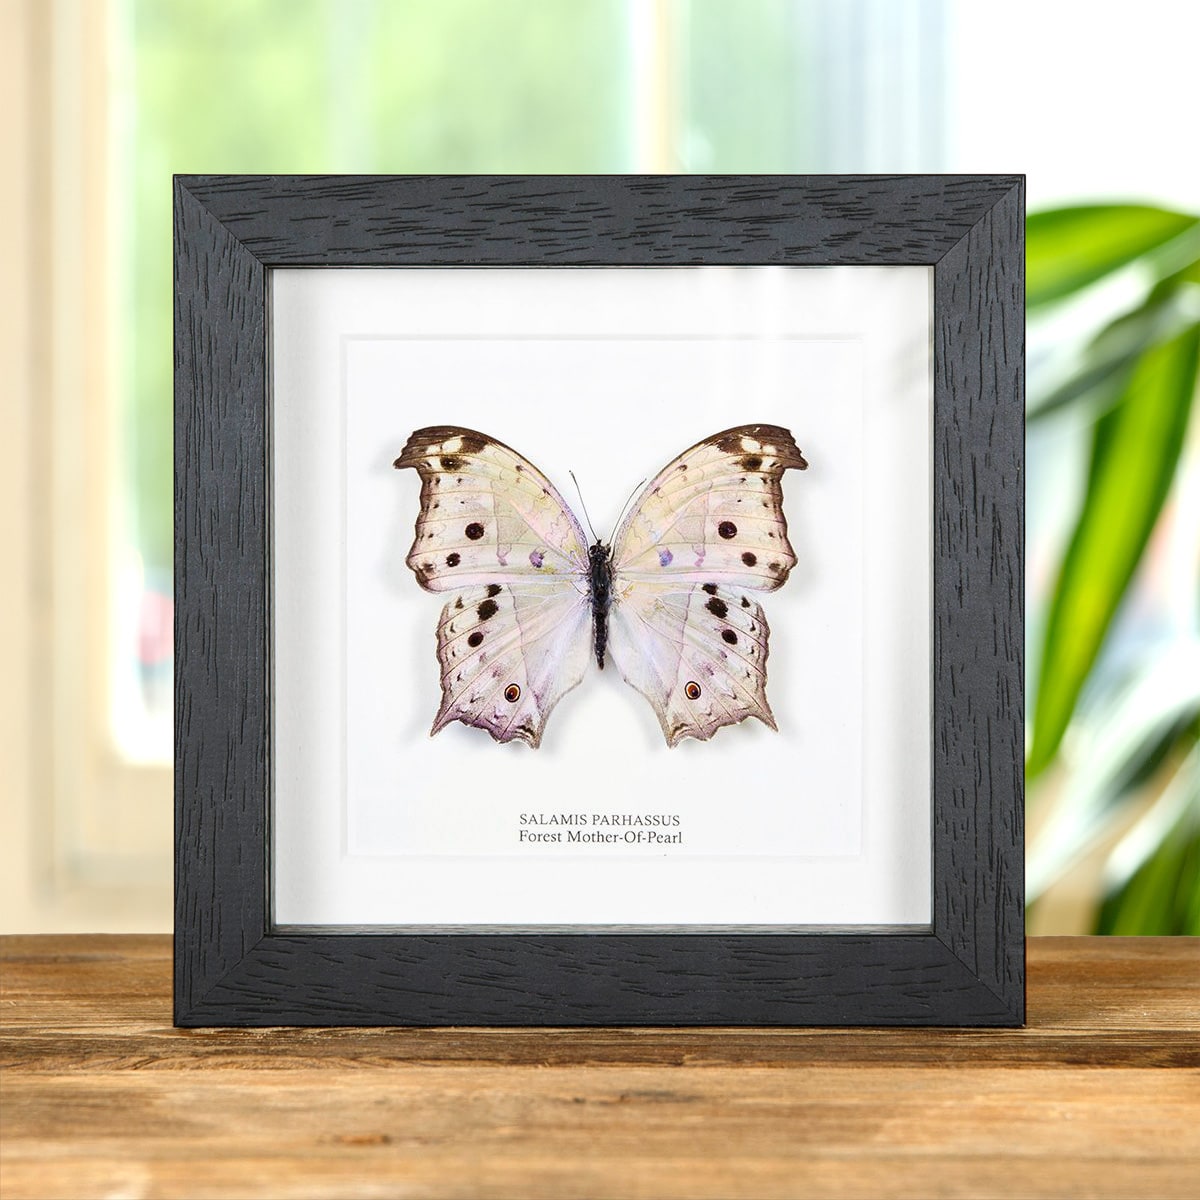 Minibeast Forest Mother-Of-Pearl Butterfly in Box Frame (Salamis parhassus)